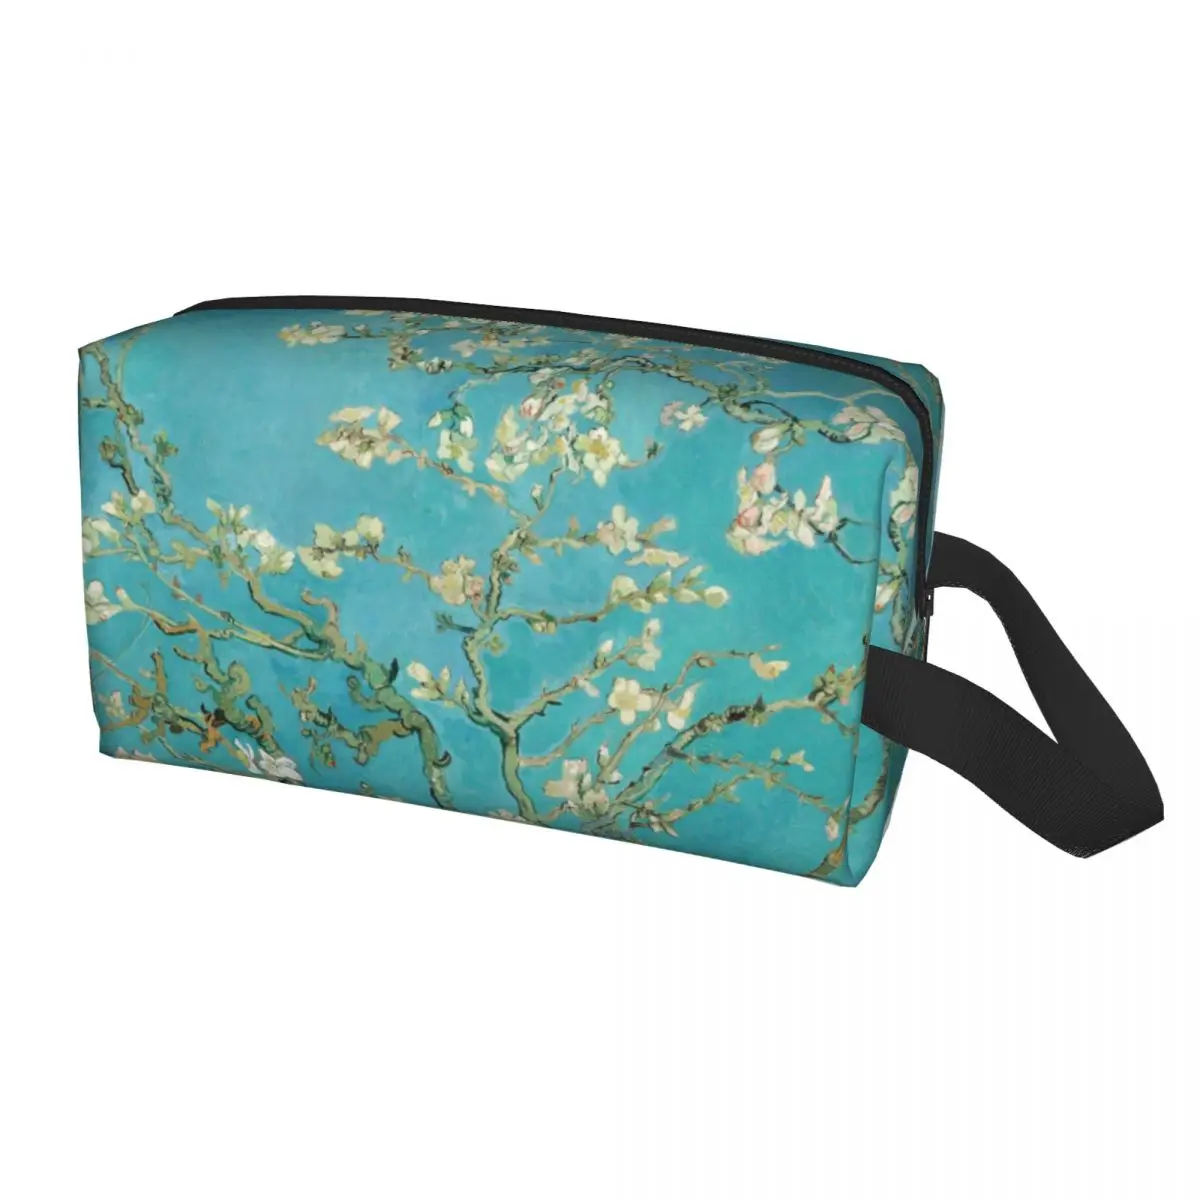 

Almond Blossoms By Vincent Van Gogh Travel Toiletry Bag Women Flowers Painting Cosmetic Makeup Bag Beauty Storage Dopp Kit